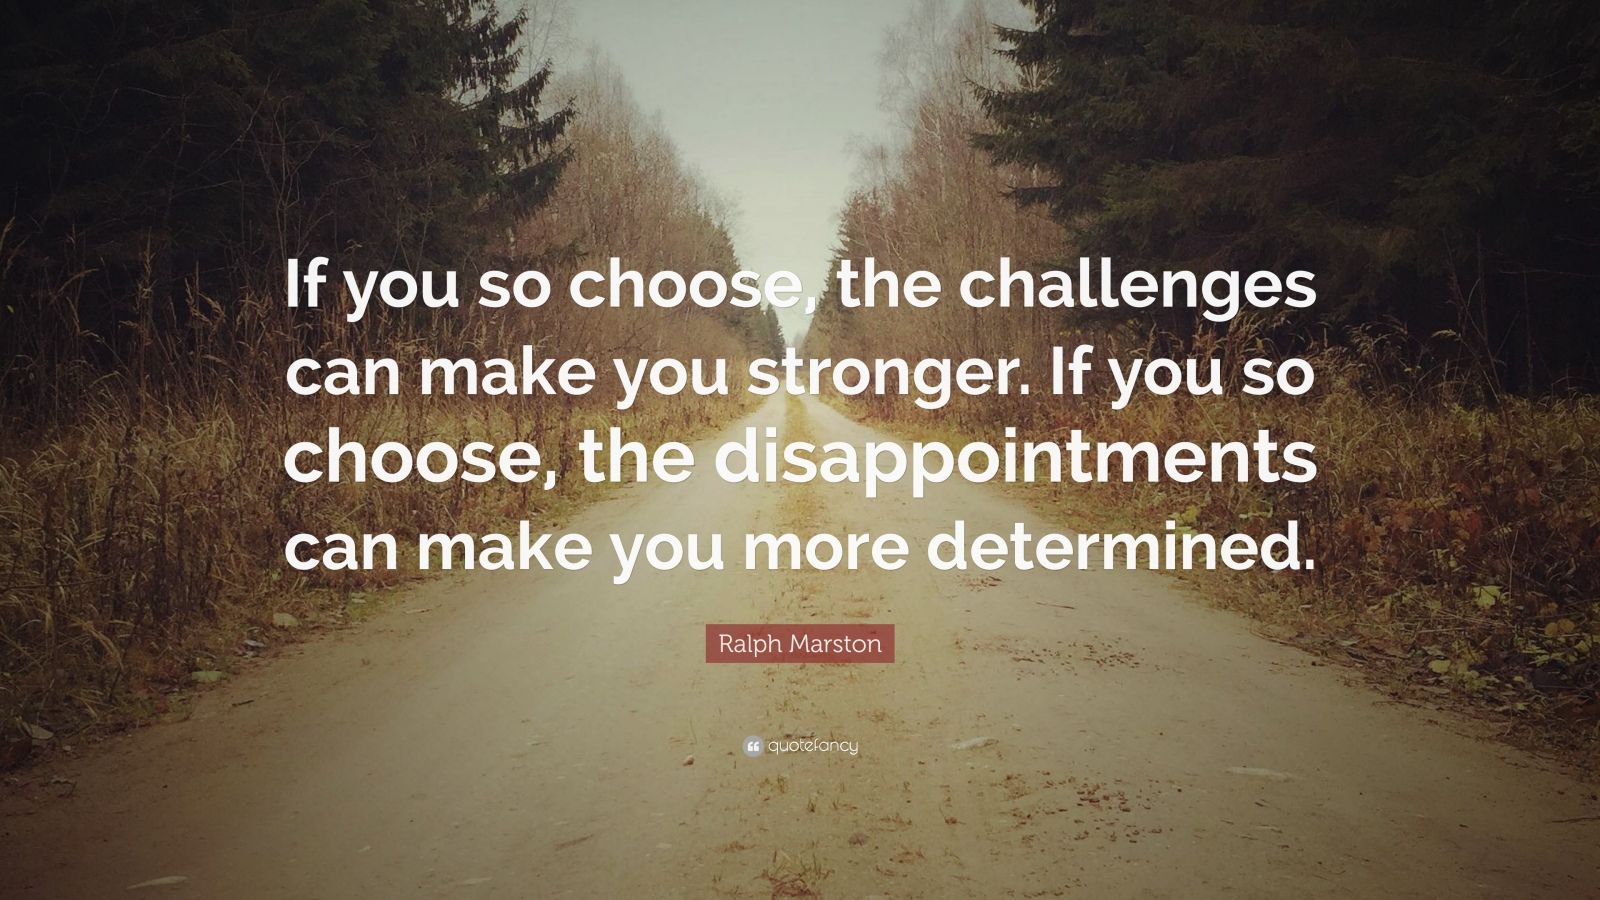 ralph-marston-quote-if-you-so-choose-the-challenges-can-make-you